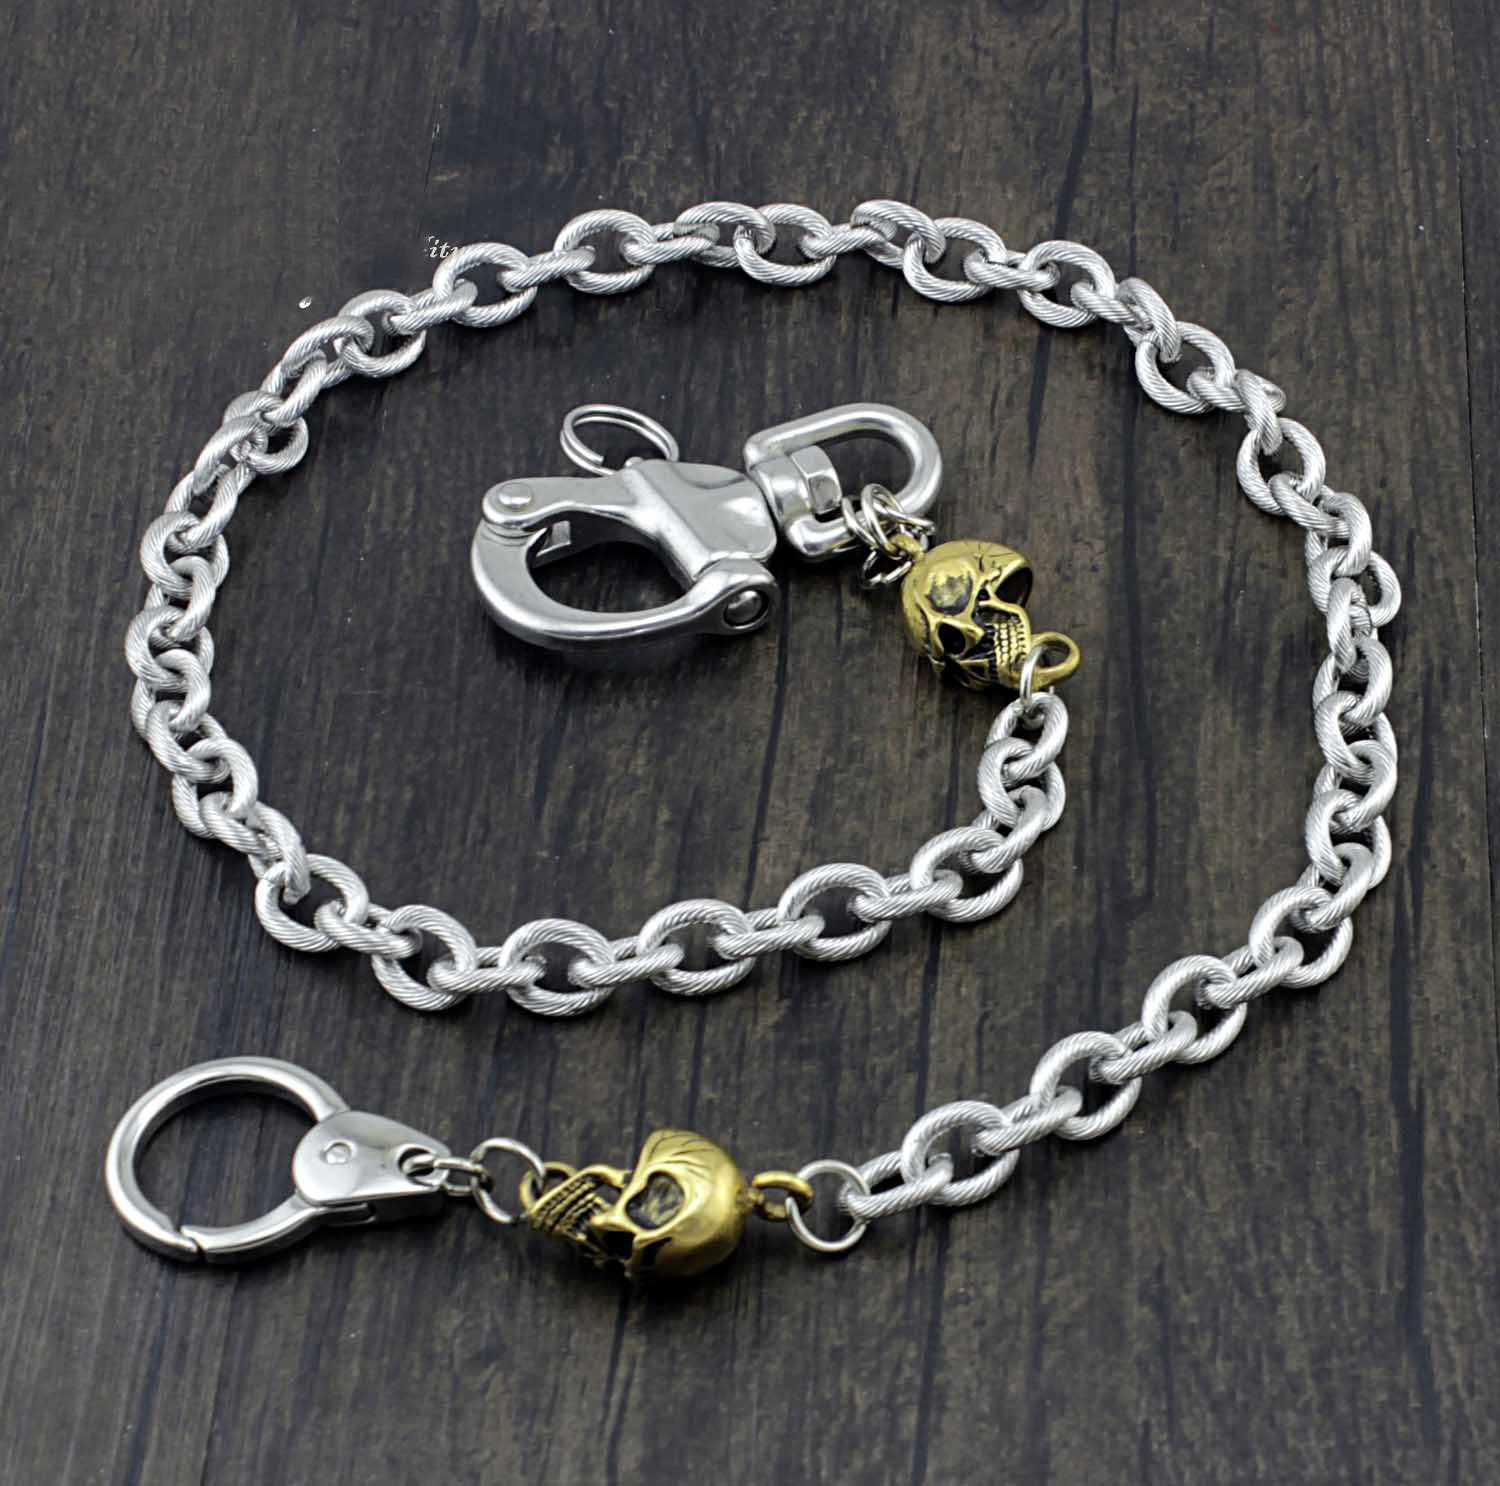 Badass Skull Stainless Steel Mens Punk Motorcycle Pants Chain Wallet Chains Long Wallet Chain For Men